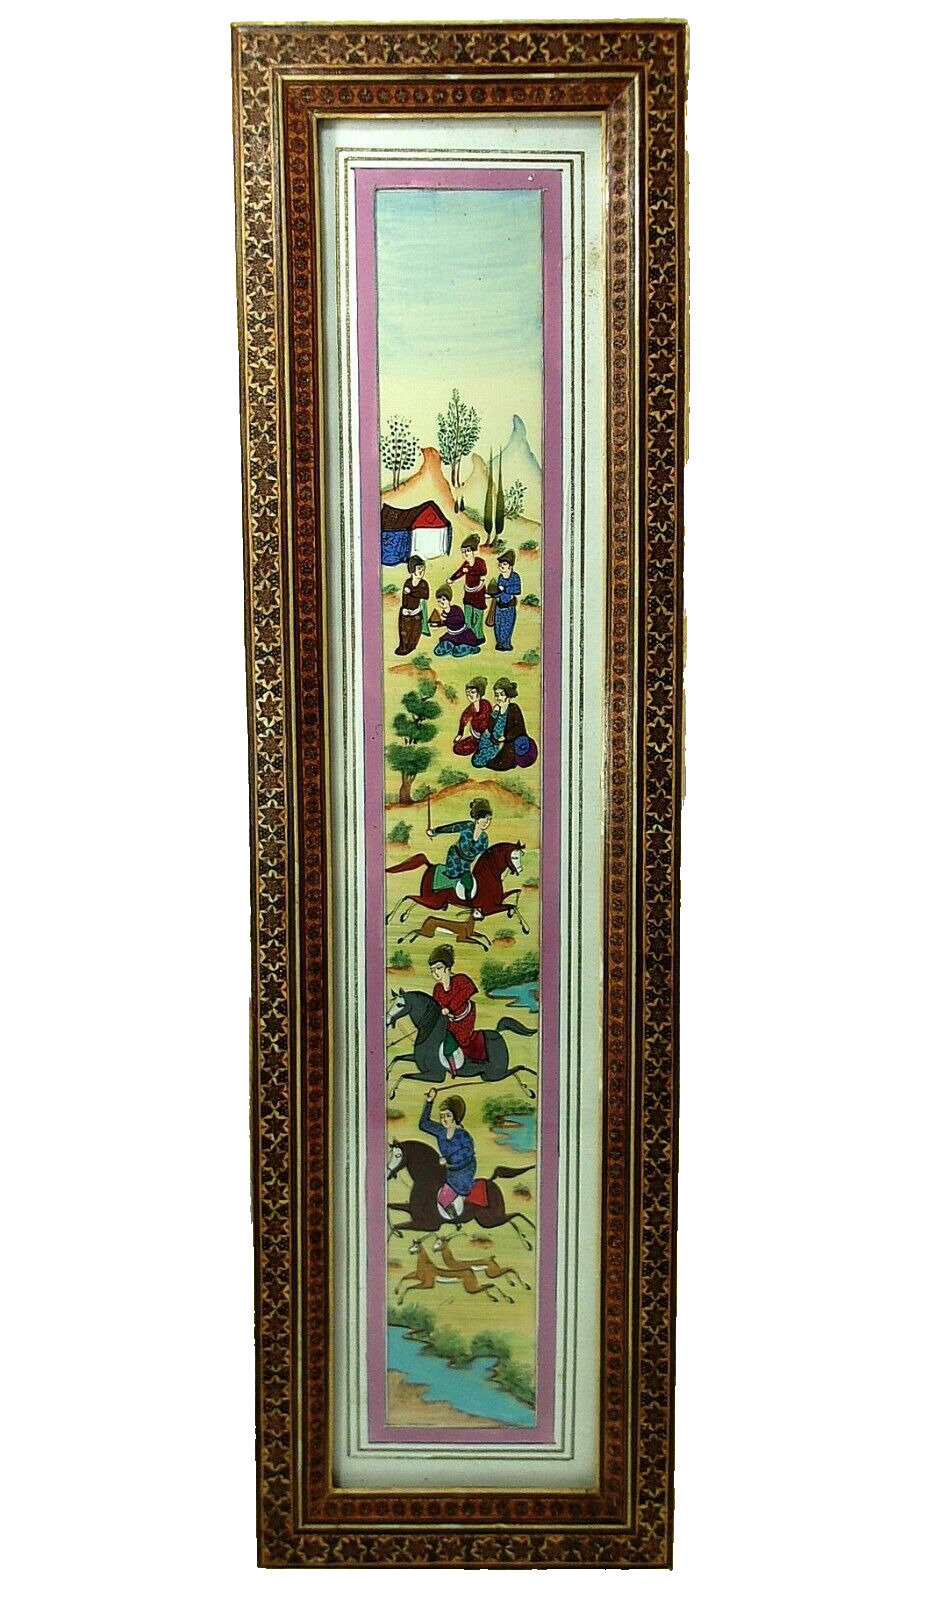 VTG Persia Middle Eastern Hunting Scene Mosaic Inlay Wood Frame